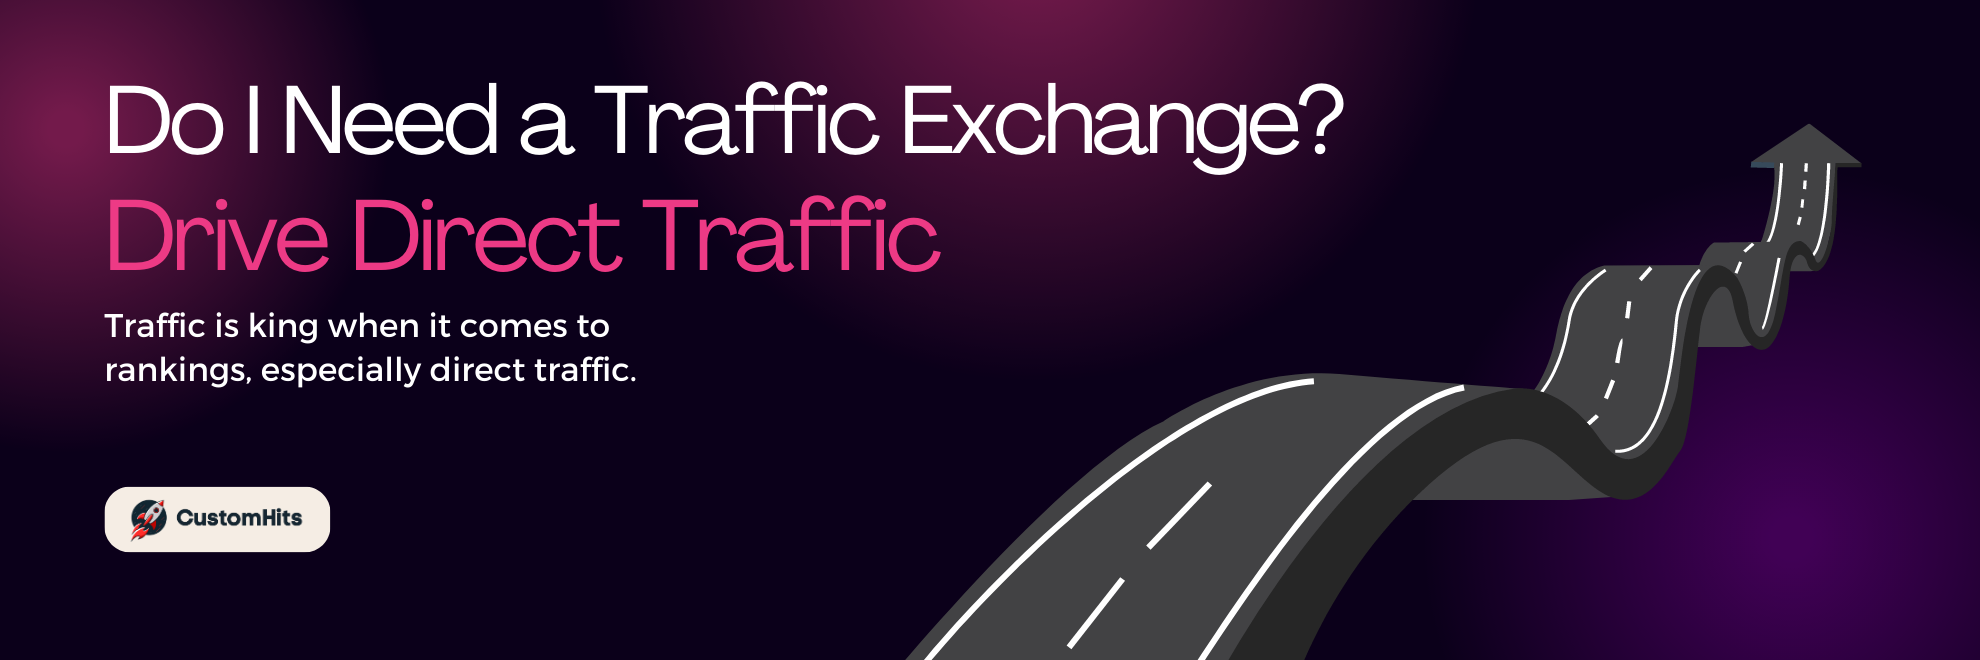 Do I Need a Traffic Exchange? Drive Direct Traffic